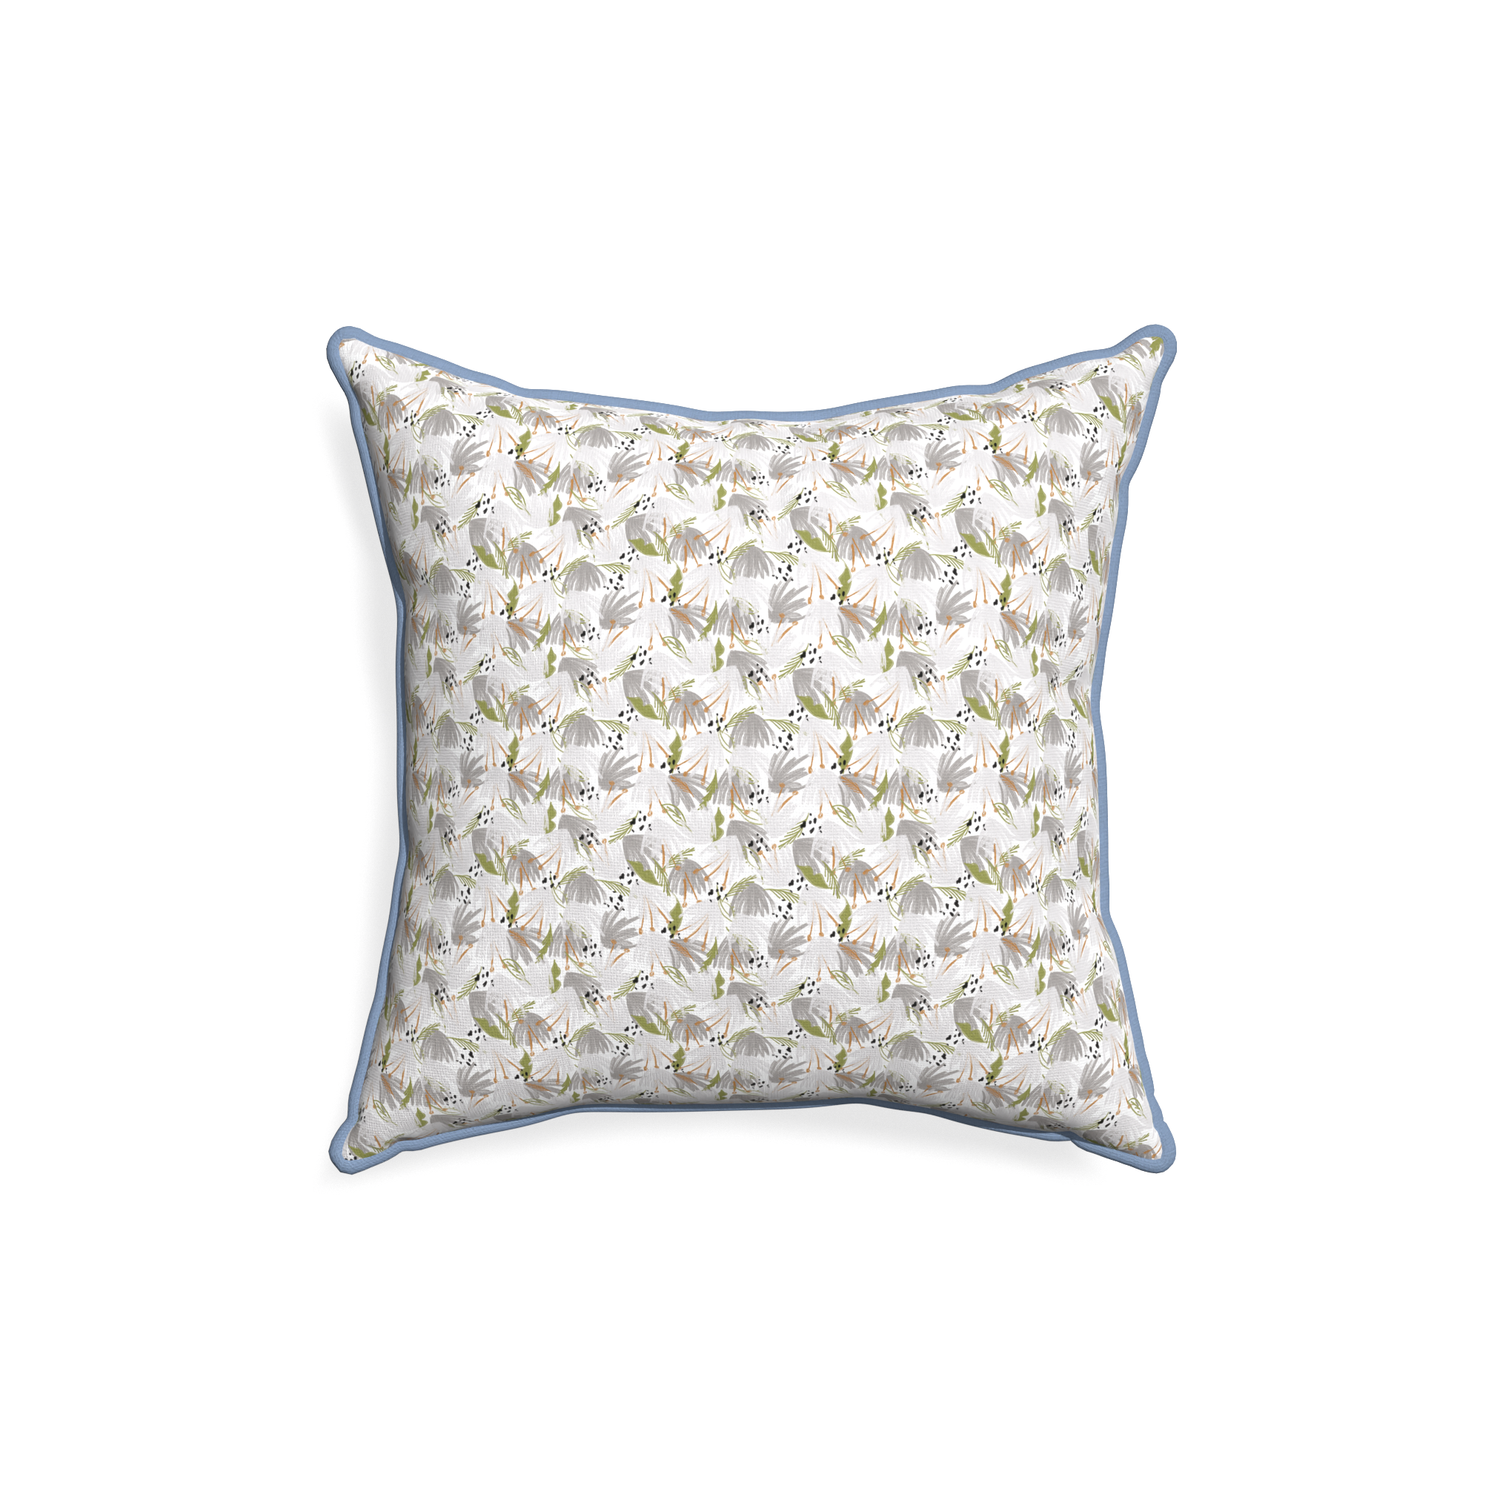 18-square eden grey custom grey floralpillow with sky piping on white background